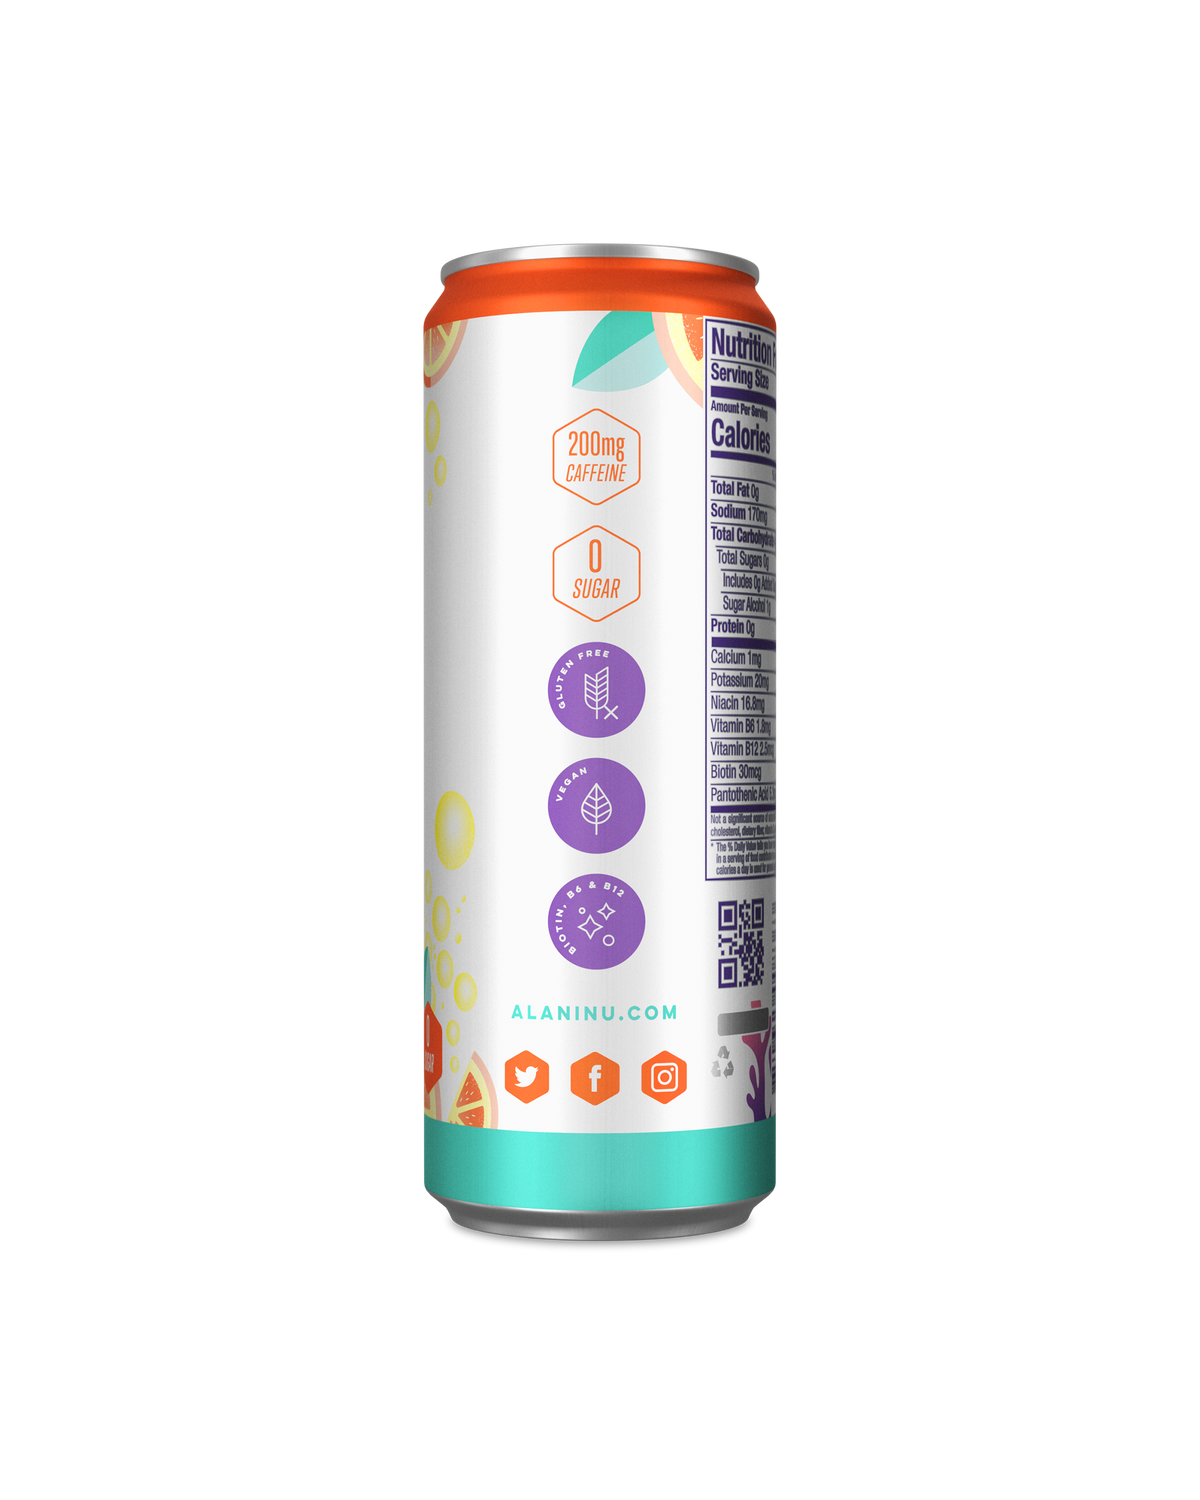 A tall, cylindrical can with a white, orange, and teal design includes icons of caffeine content (200mg), sugar (0), and other attributes. Website link, &quot;ALANIU.COM,&quot; is printed at the bottom. The product is Energy Drink - Mimosa by Alani Nu.